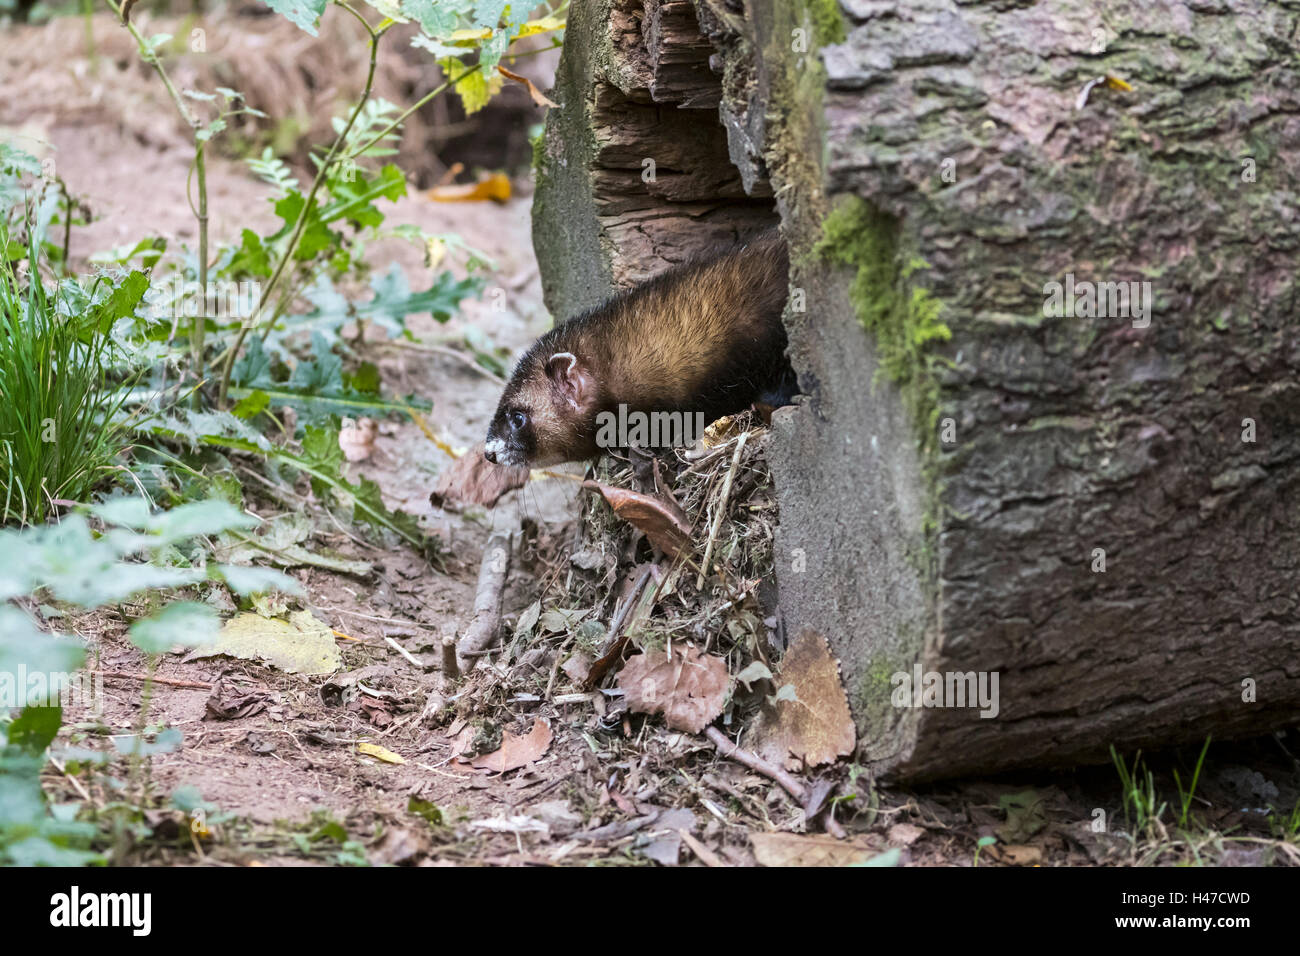 European polecat (Mustela putorius) at entrance of nest in hollow tree trunk in forest Stock Photo